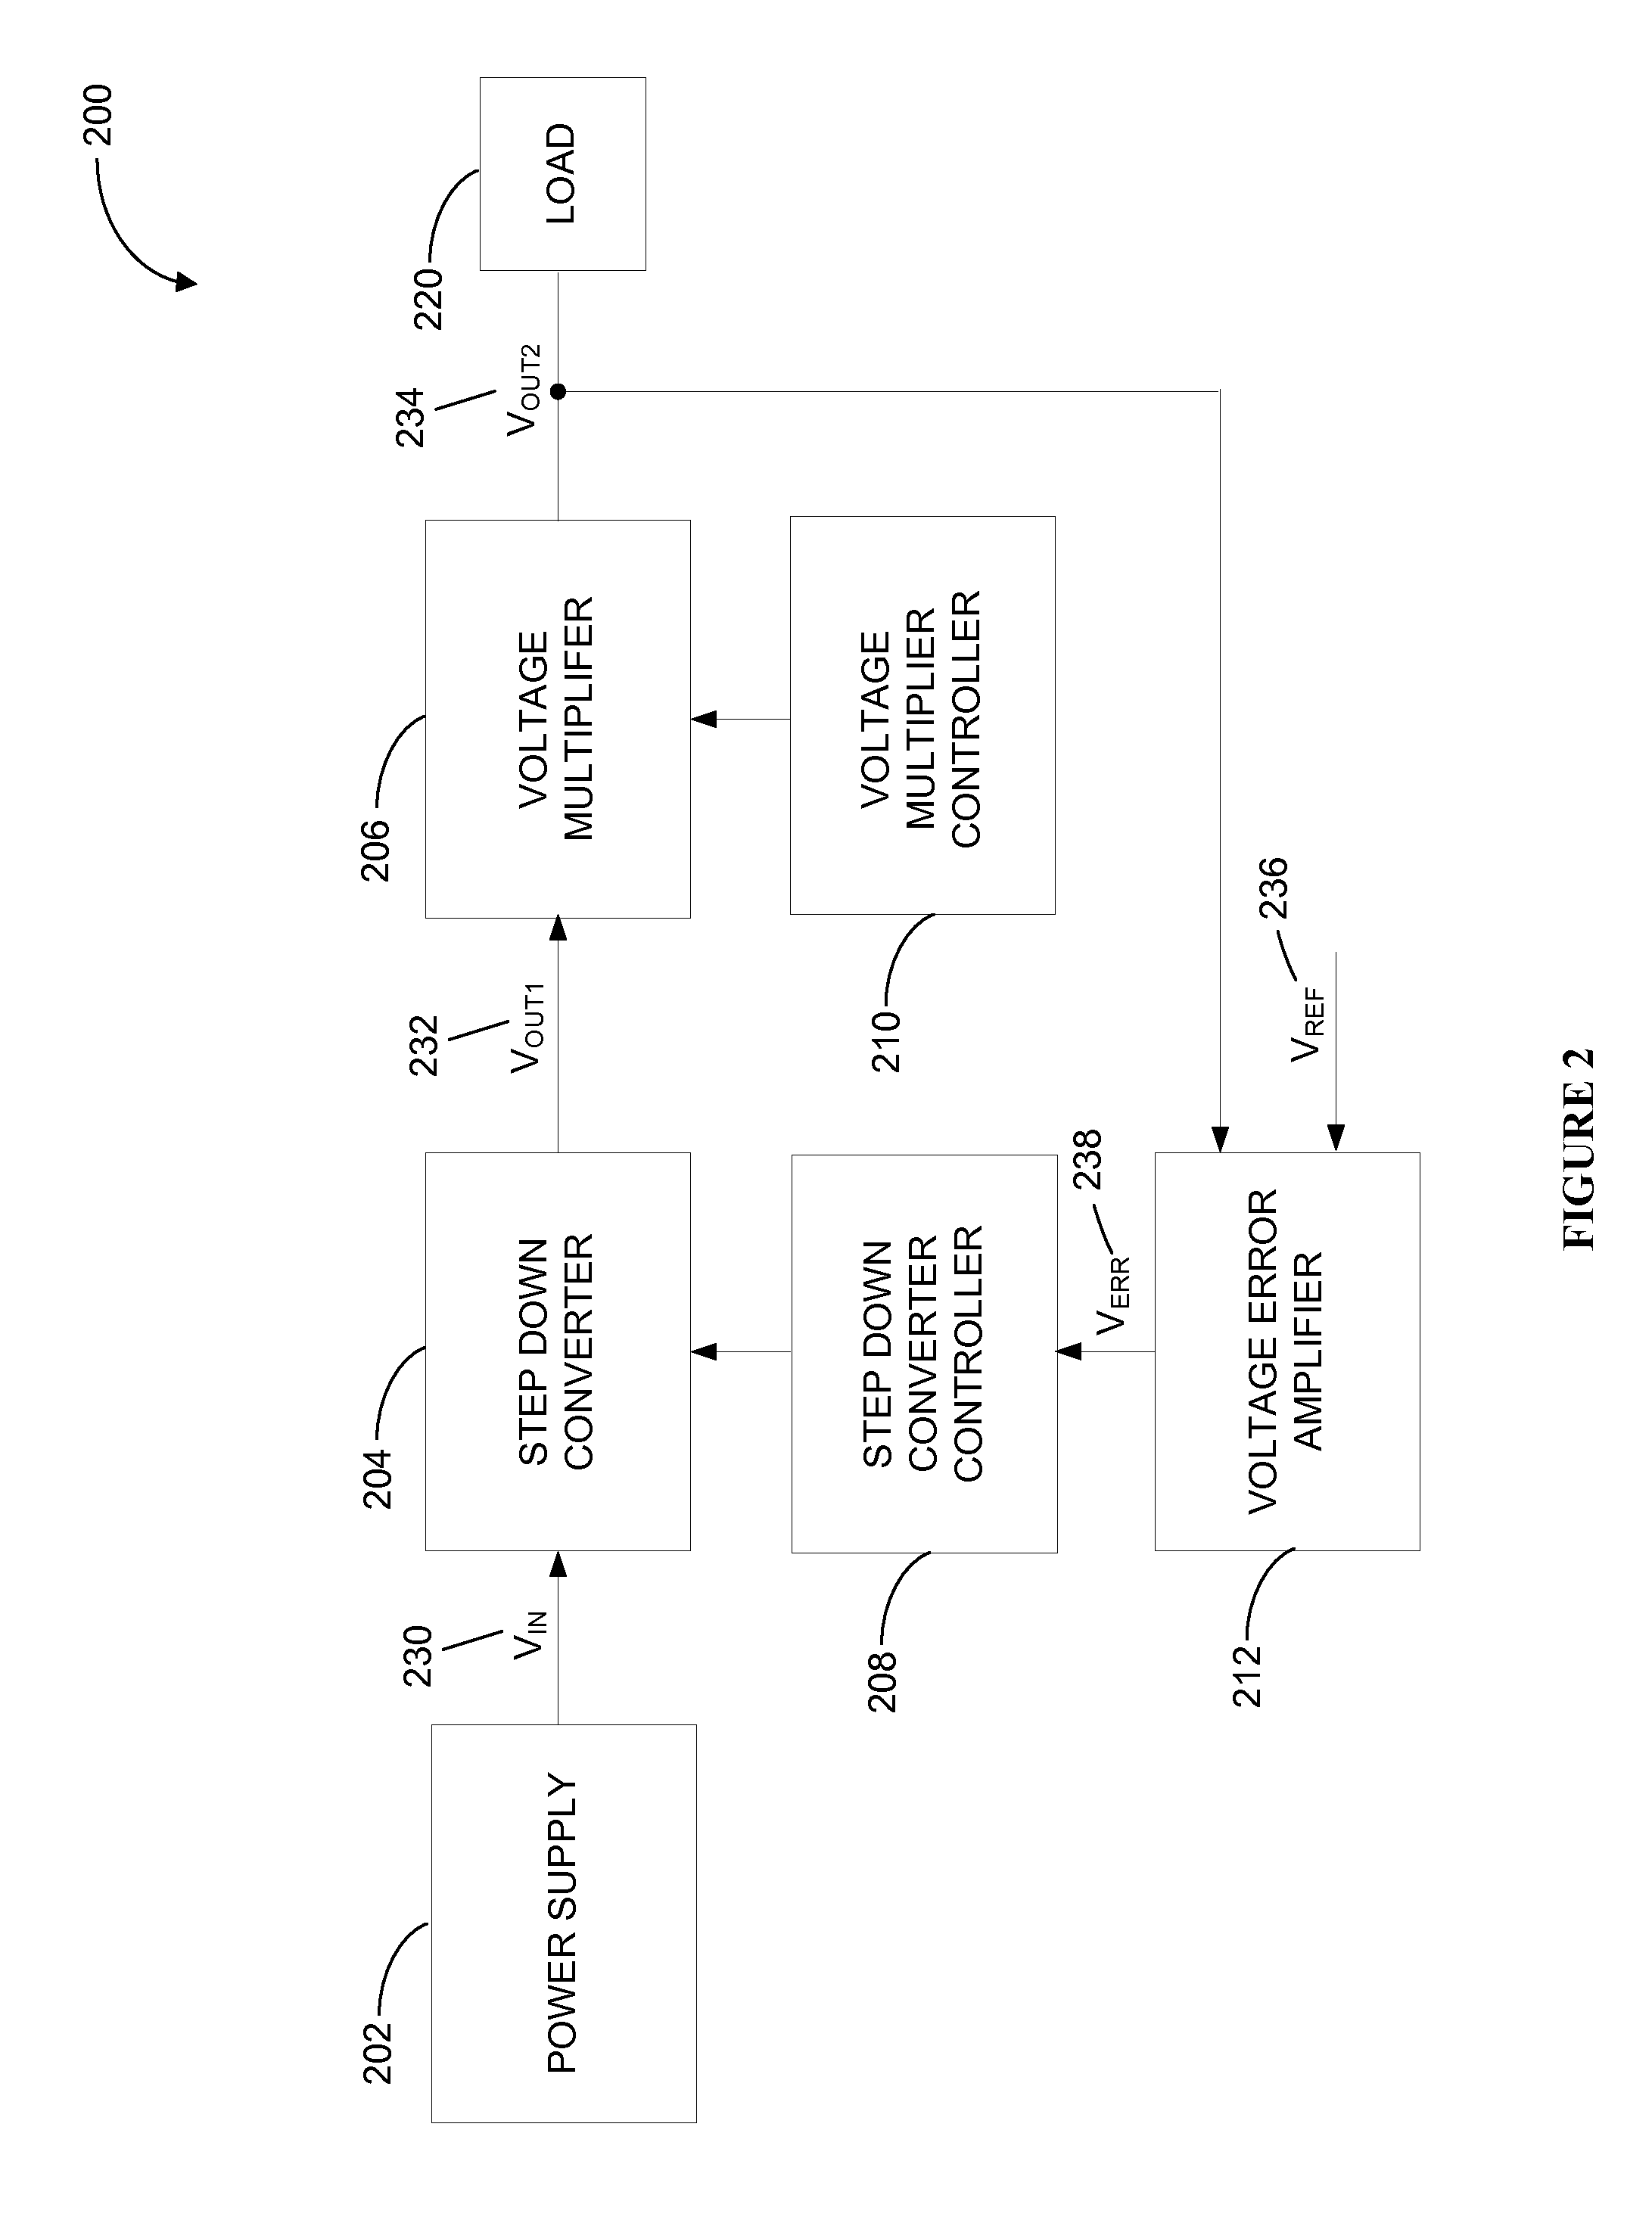 System and Methods for Two-Stage Buck Boost Converters with Fast Transient Response